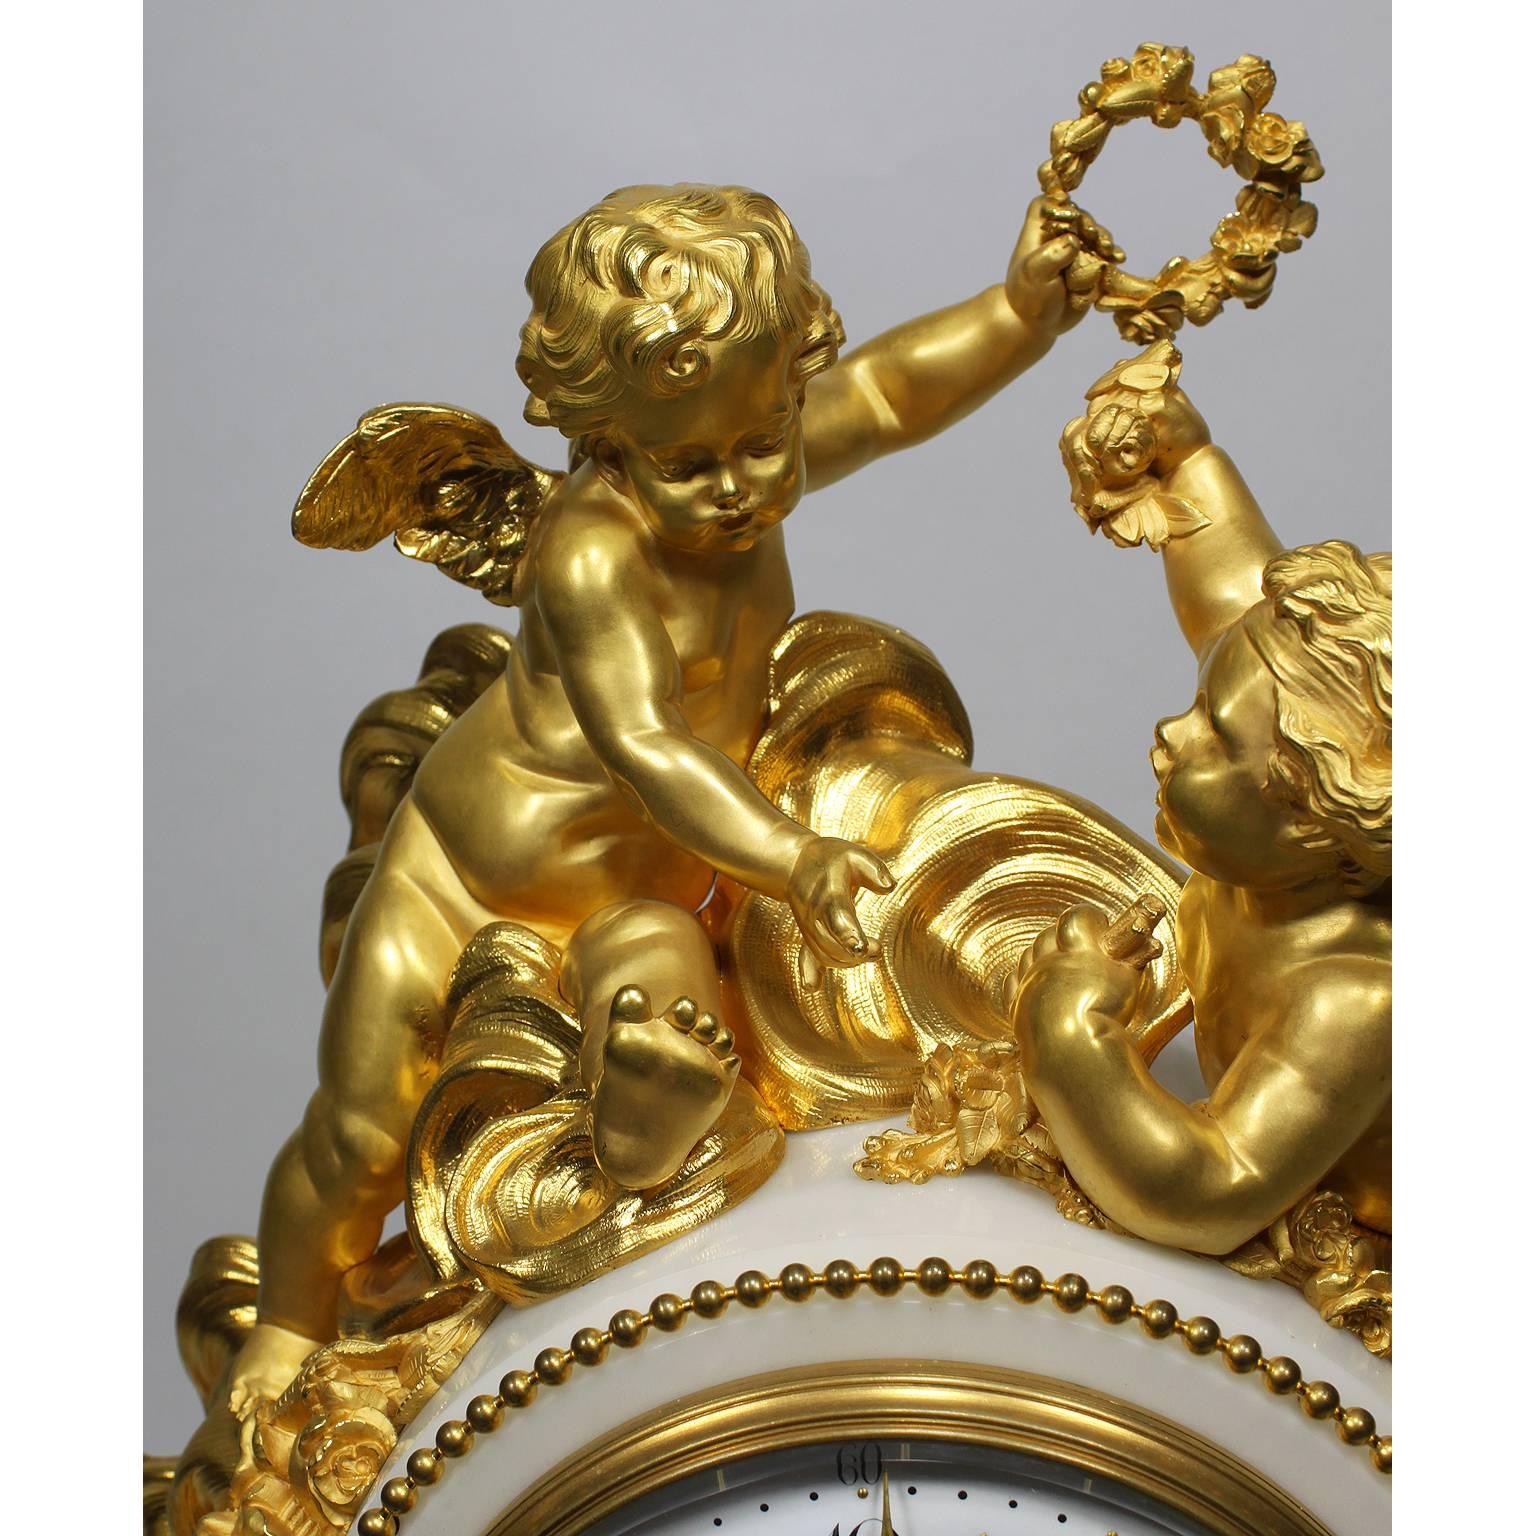 French Palatial 19th Century Louis XV Style Ormolu Mantel Clock, Beurdeley Attributed